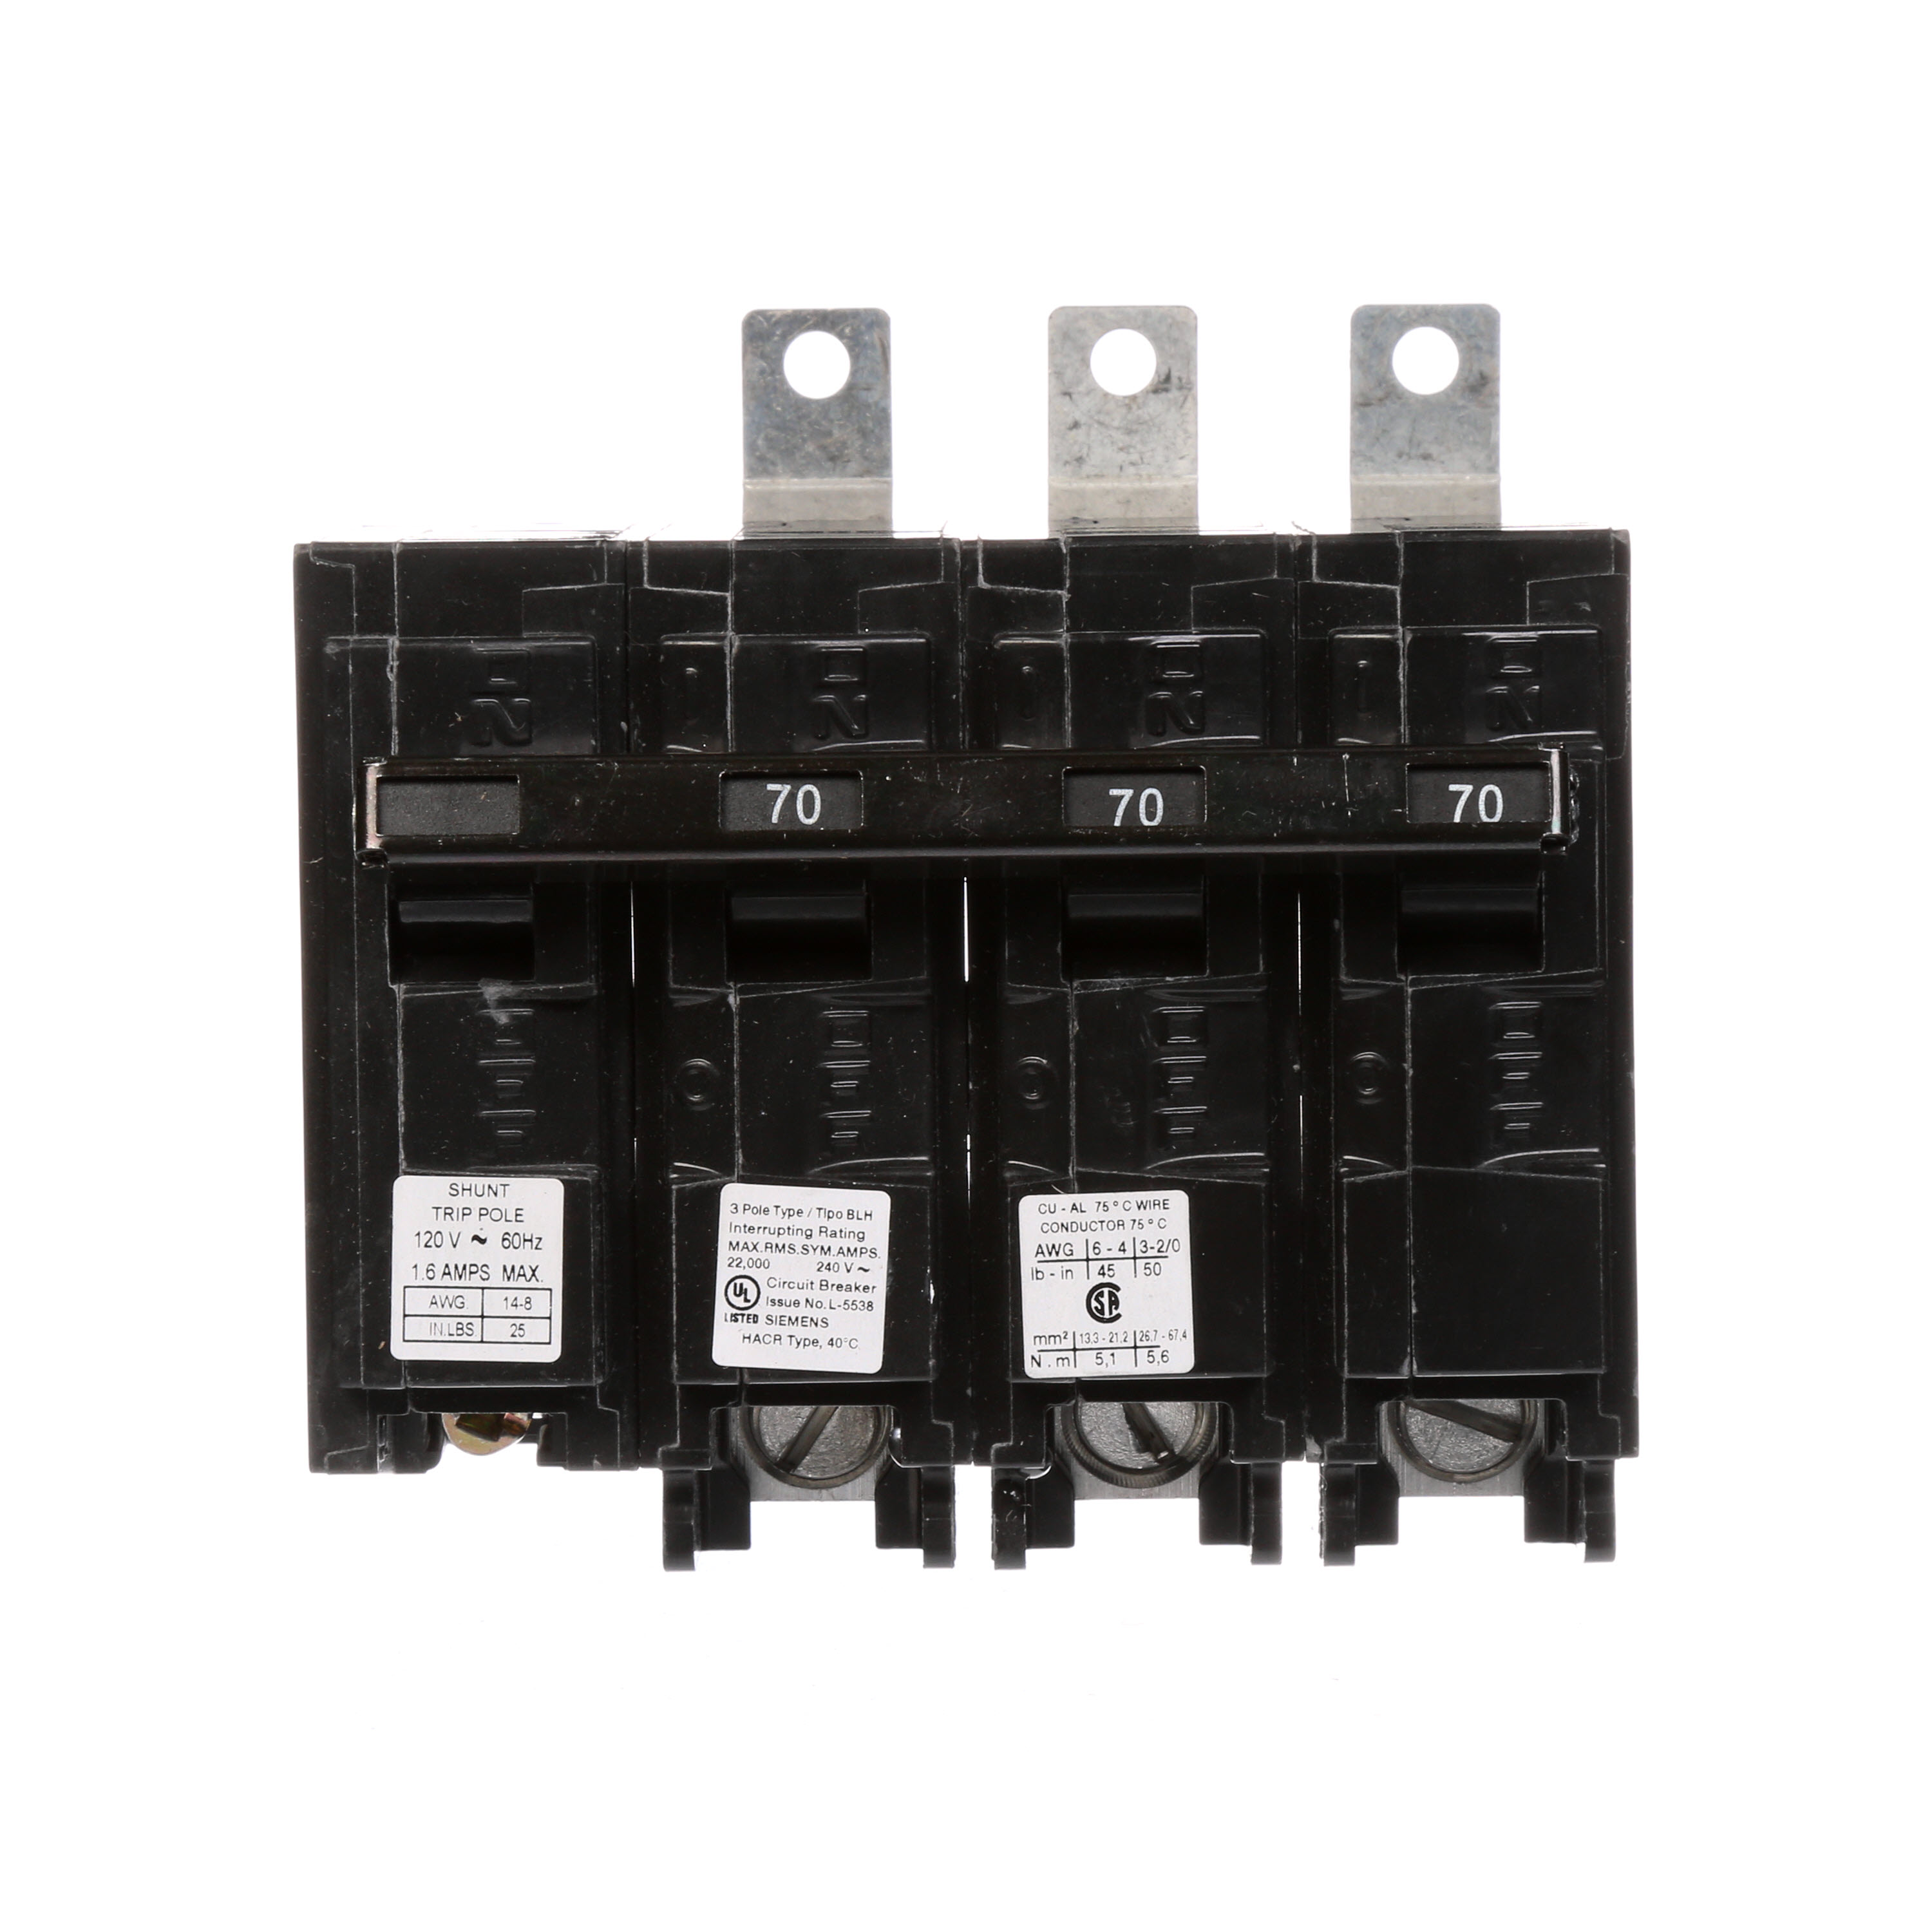 Siemens Low Voltage Molded Case Circuit Breakers Panelboard Mounting 240V Circuit Breakers - Type BL, 3-Pole, 240VAC are Circuit Protection Molded Case CircuitBreakers. Type BLH Special Features Shunt Trip 120V Application Electrical Distribution Standard UL 489 Voltage Rating 120/240V Amperage Rating 70A Trip Range Thermal Magnetic Interrupt Rating 22 AIC Number Of Poles 3P